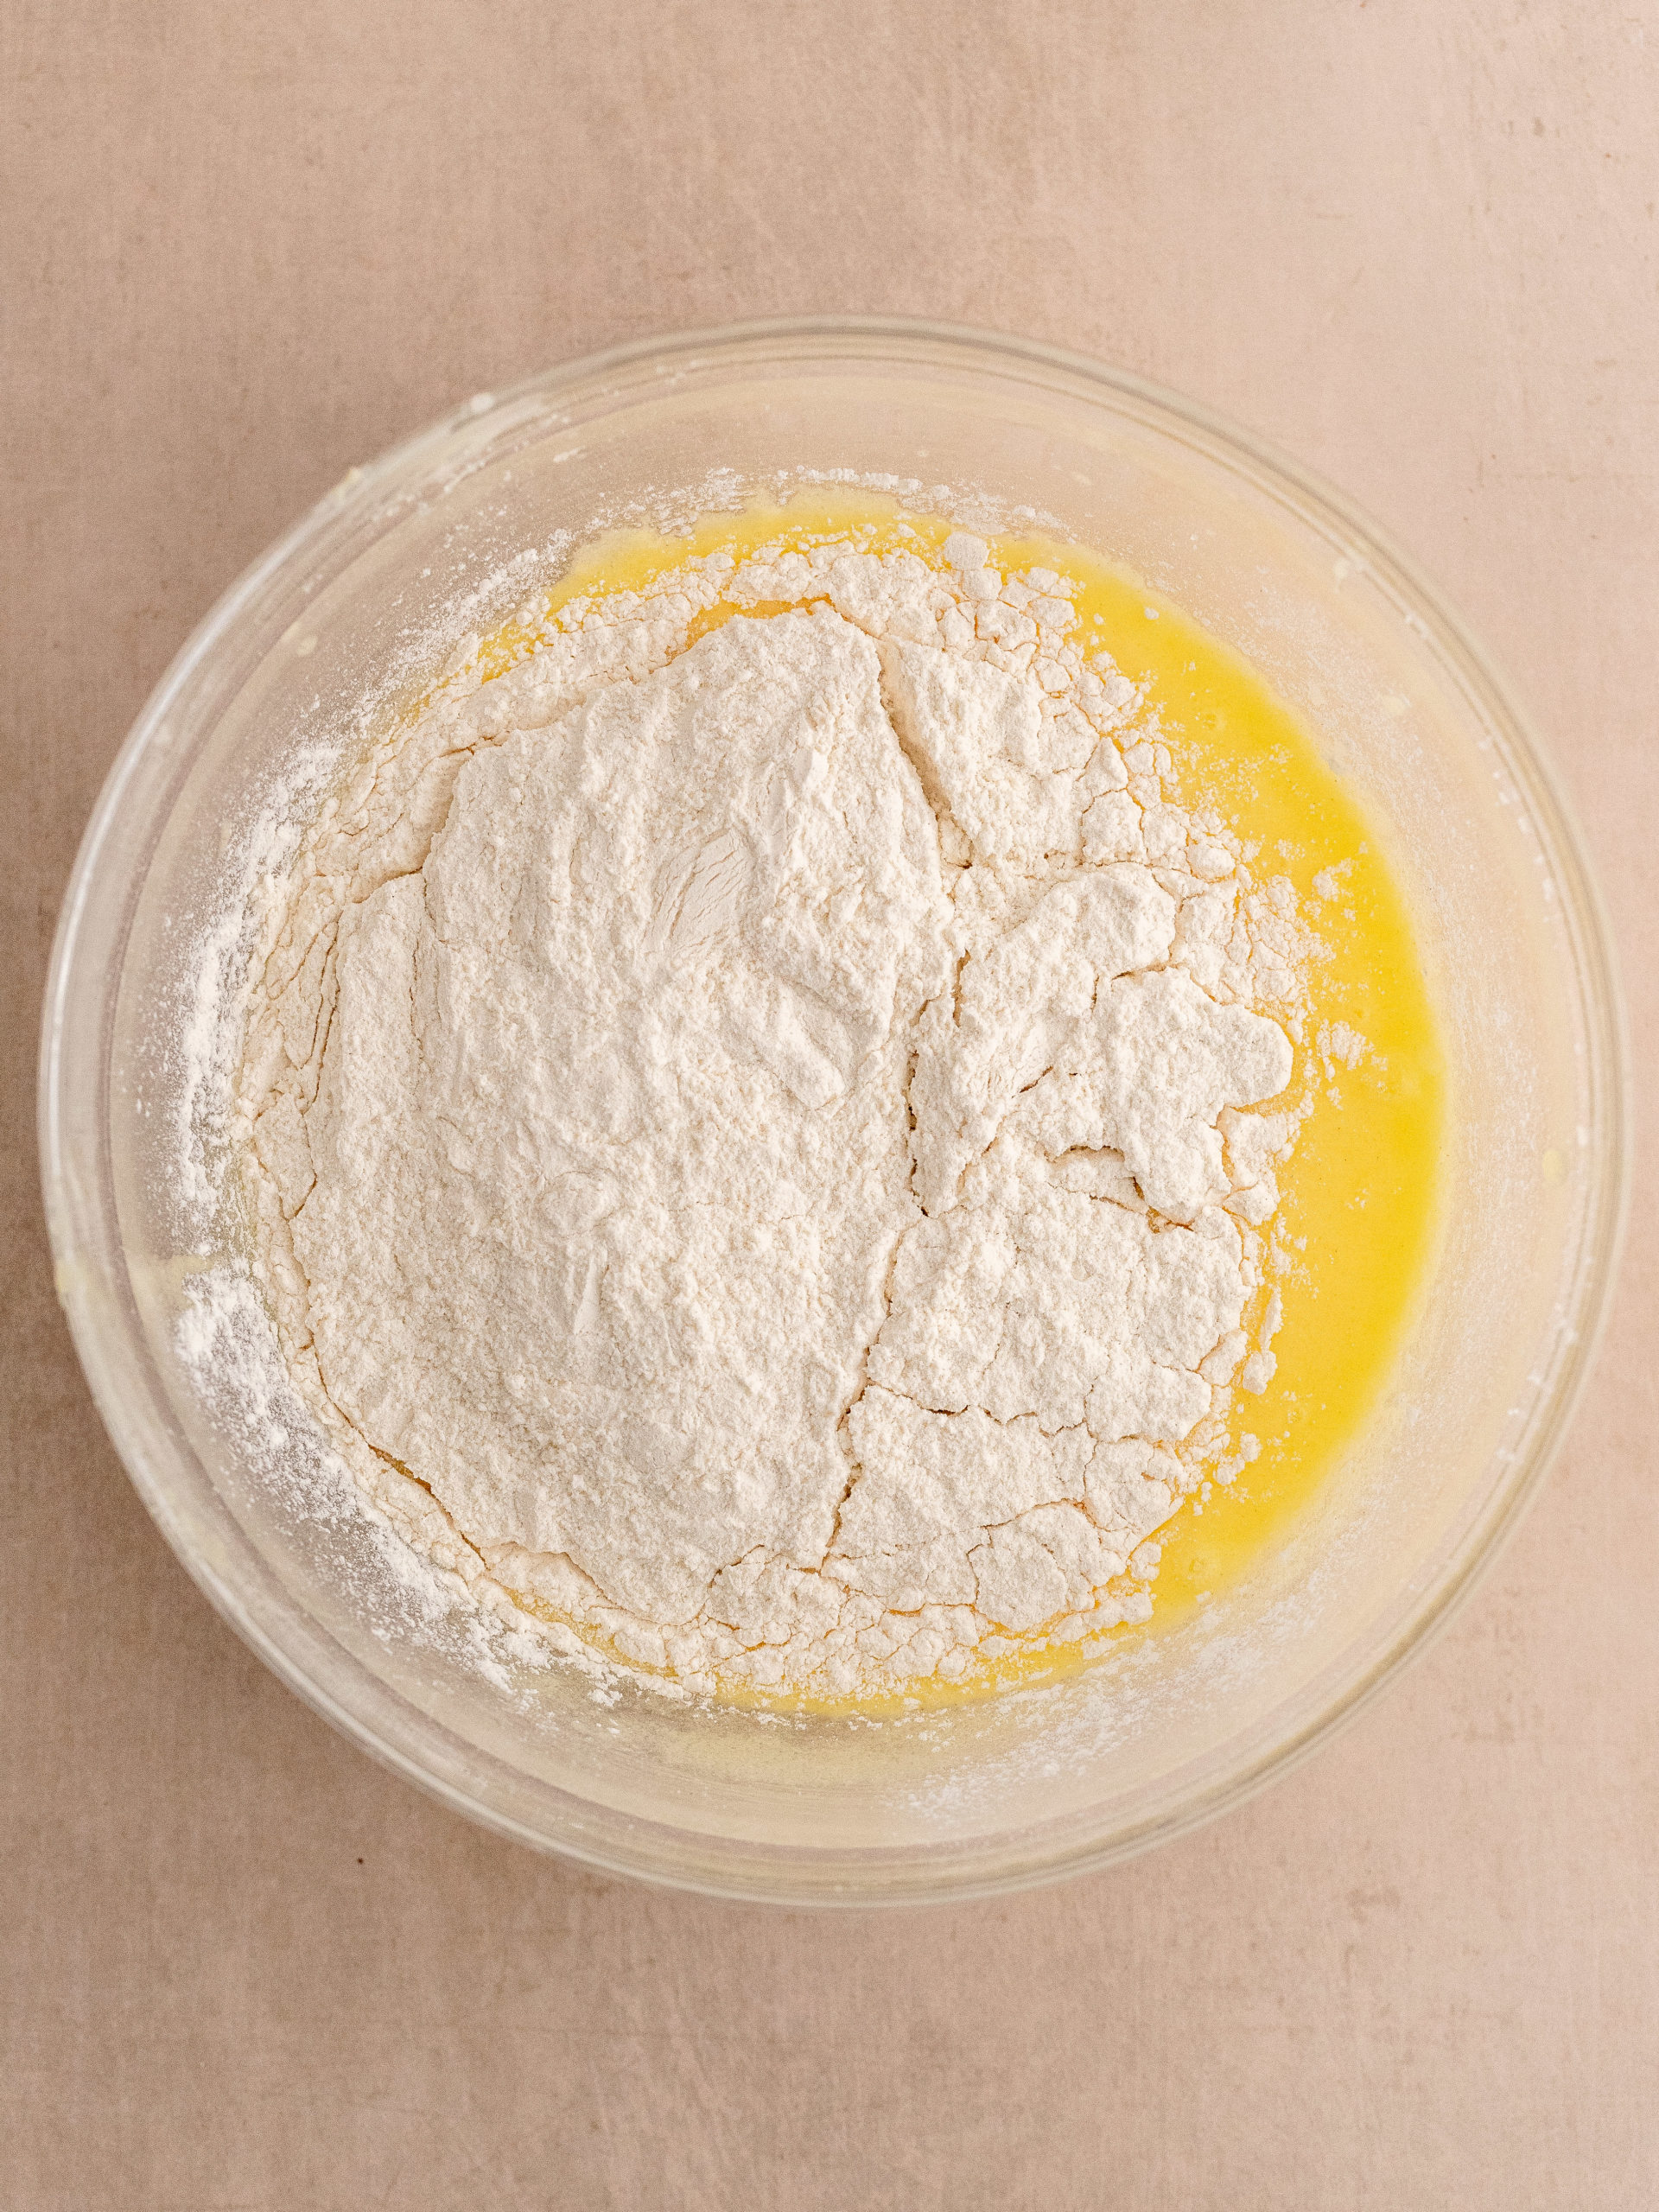 flour is added to the cake batter.